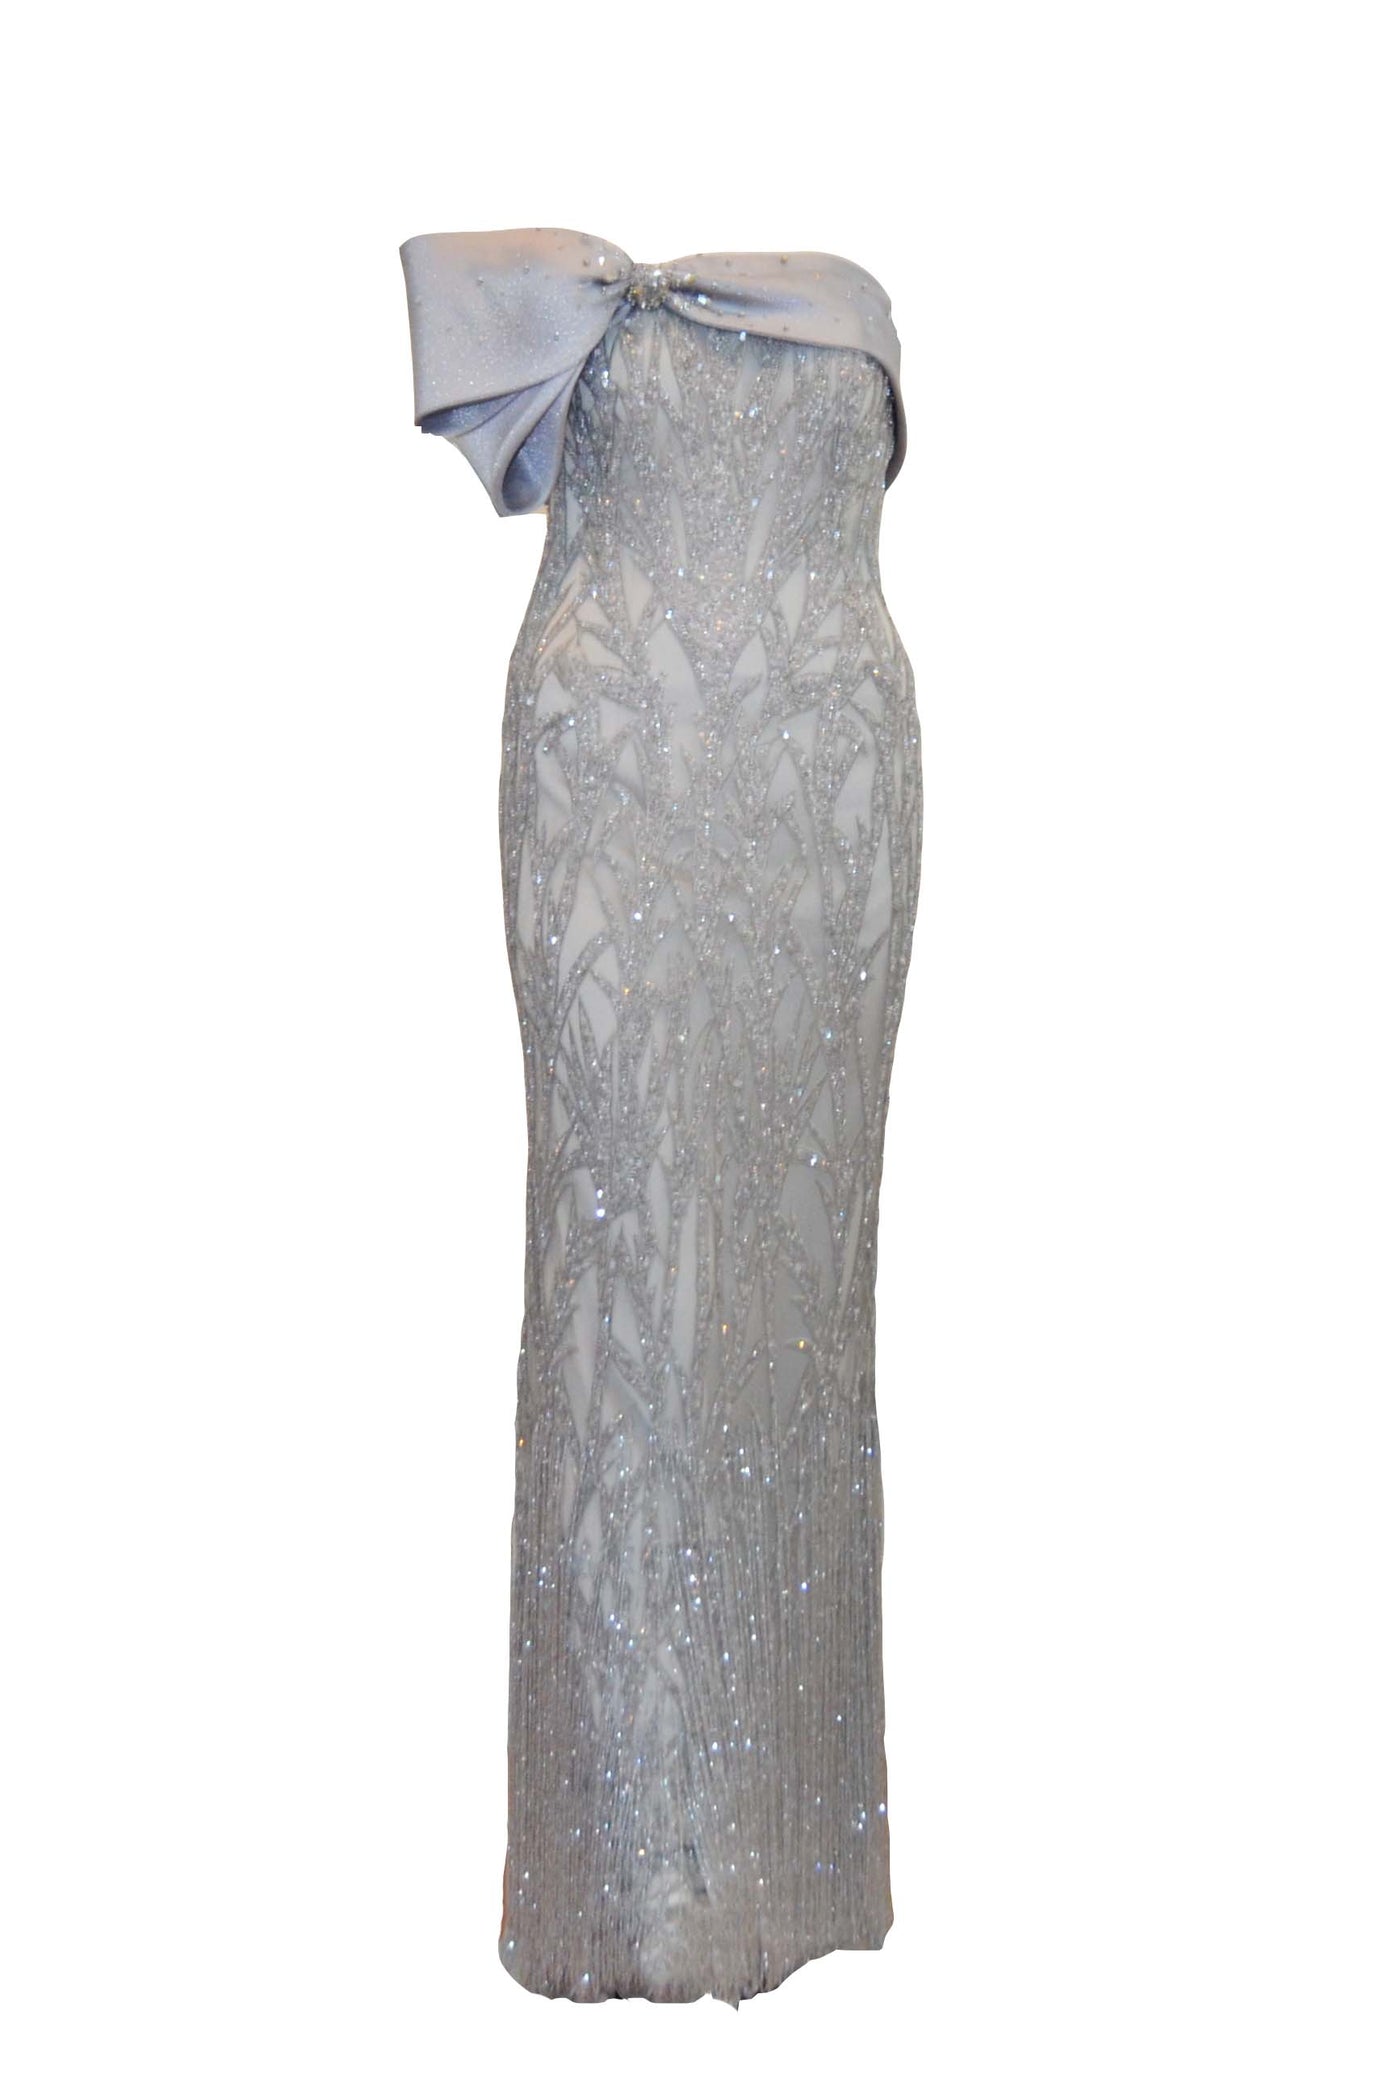 Sale: Anrini Polim Silver Strapless Fully Beaded Gown with Bow